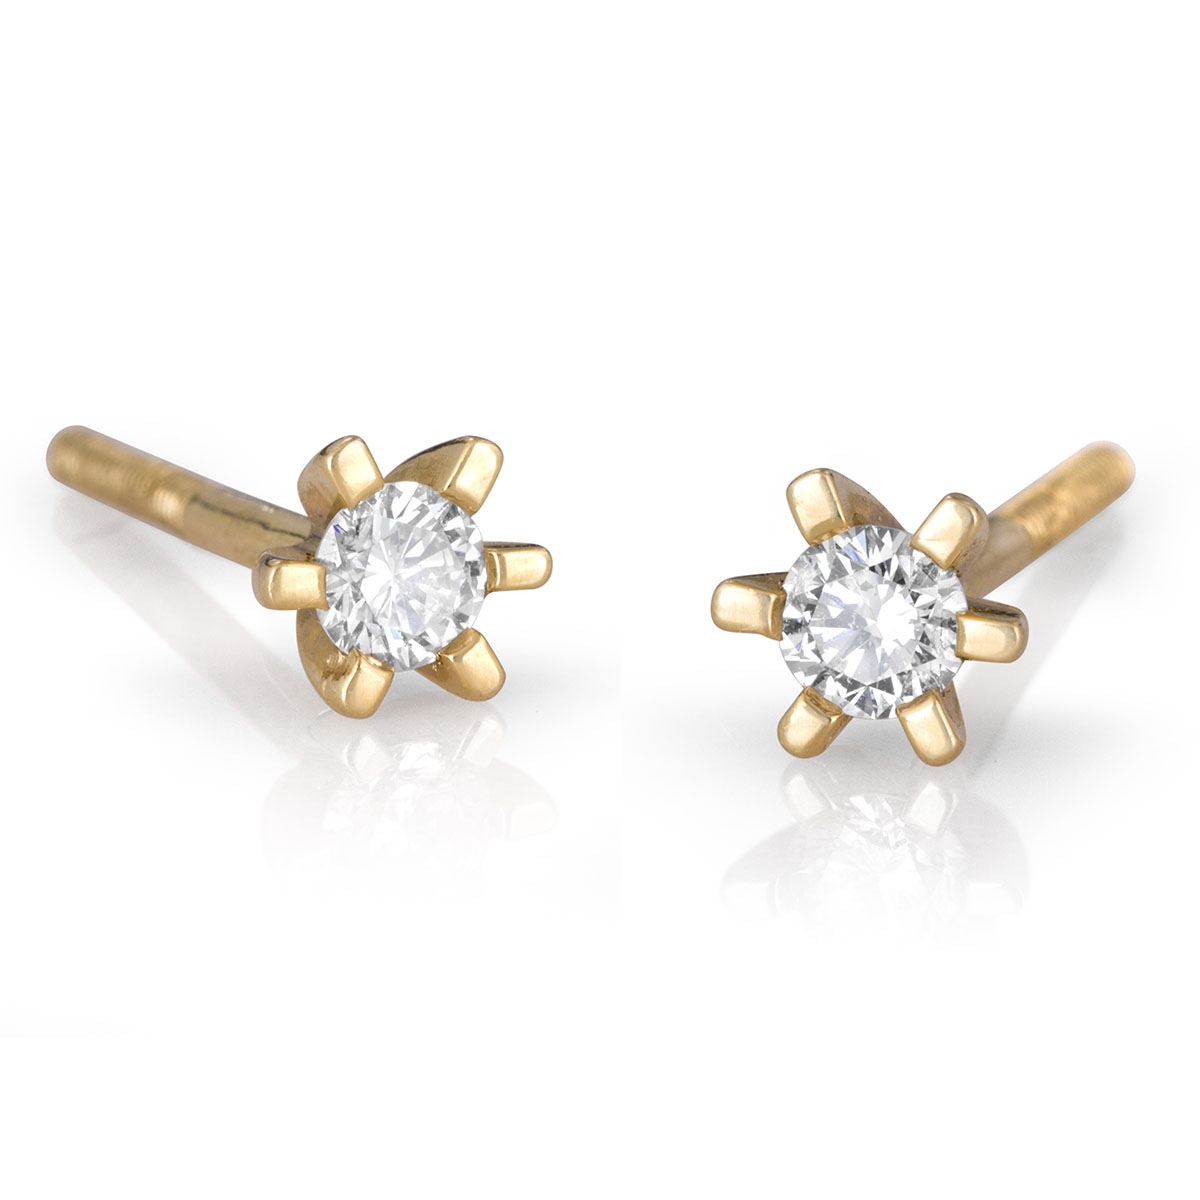 14K Gold 6-Prong Diamond Stud Earrings 0.24 ct (Choice of Color) - 1